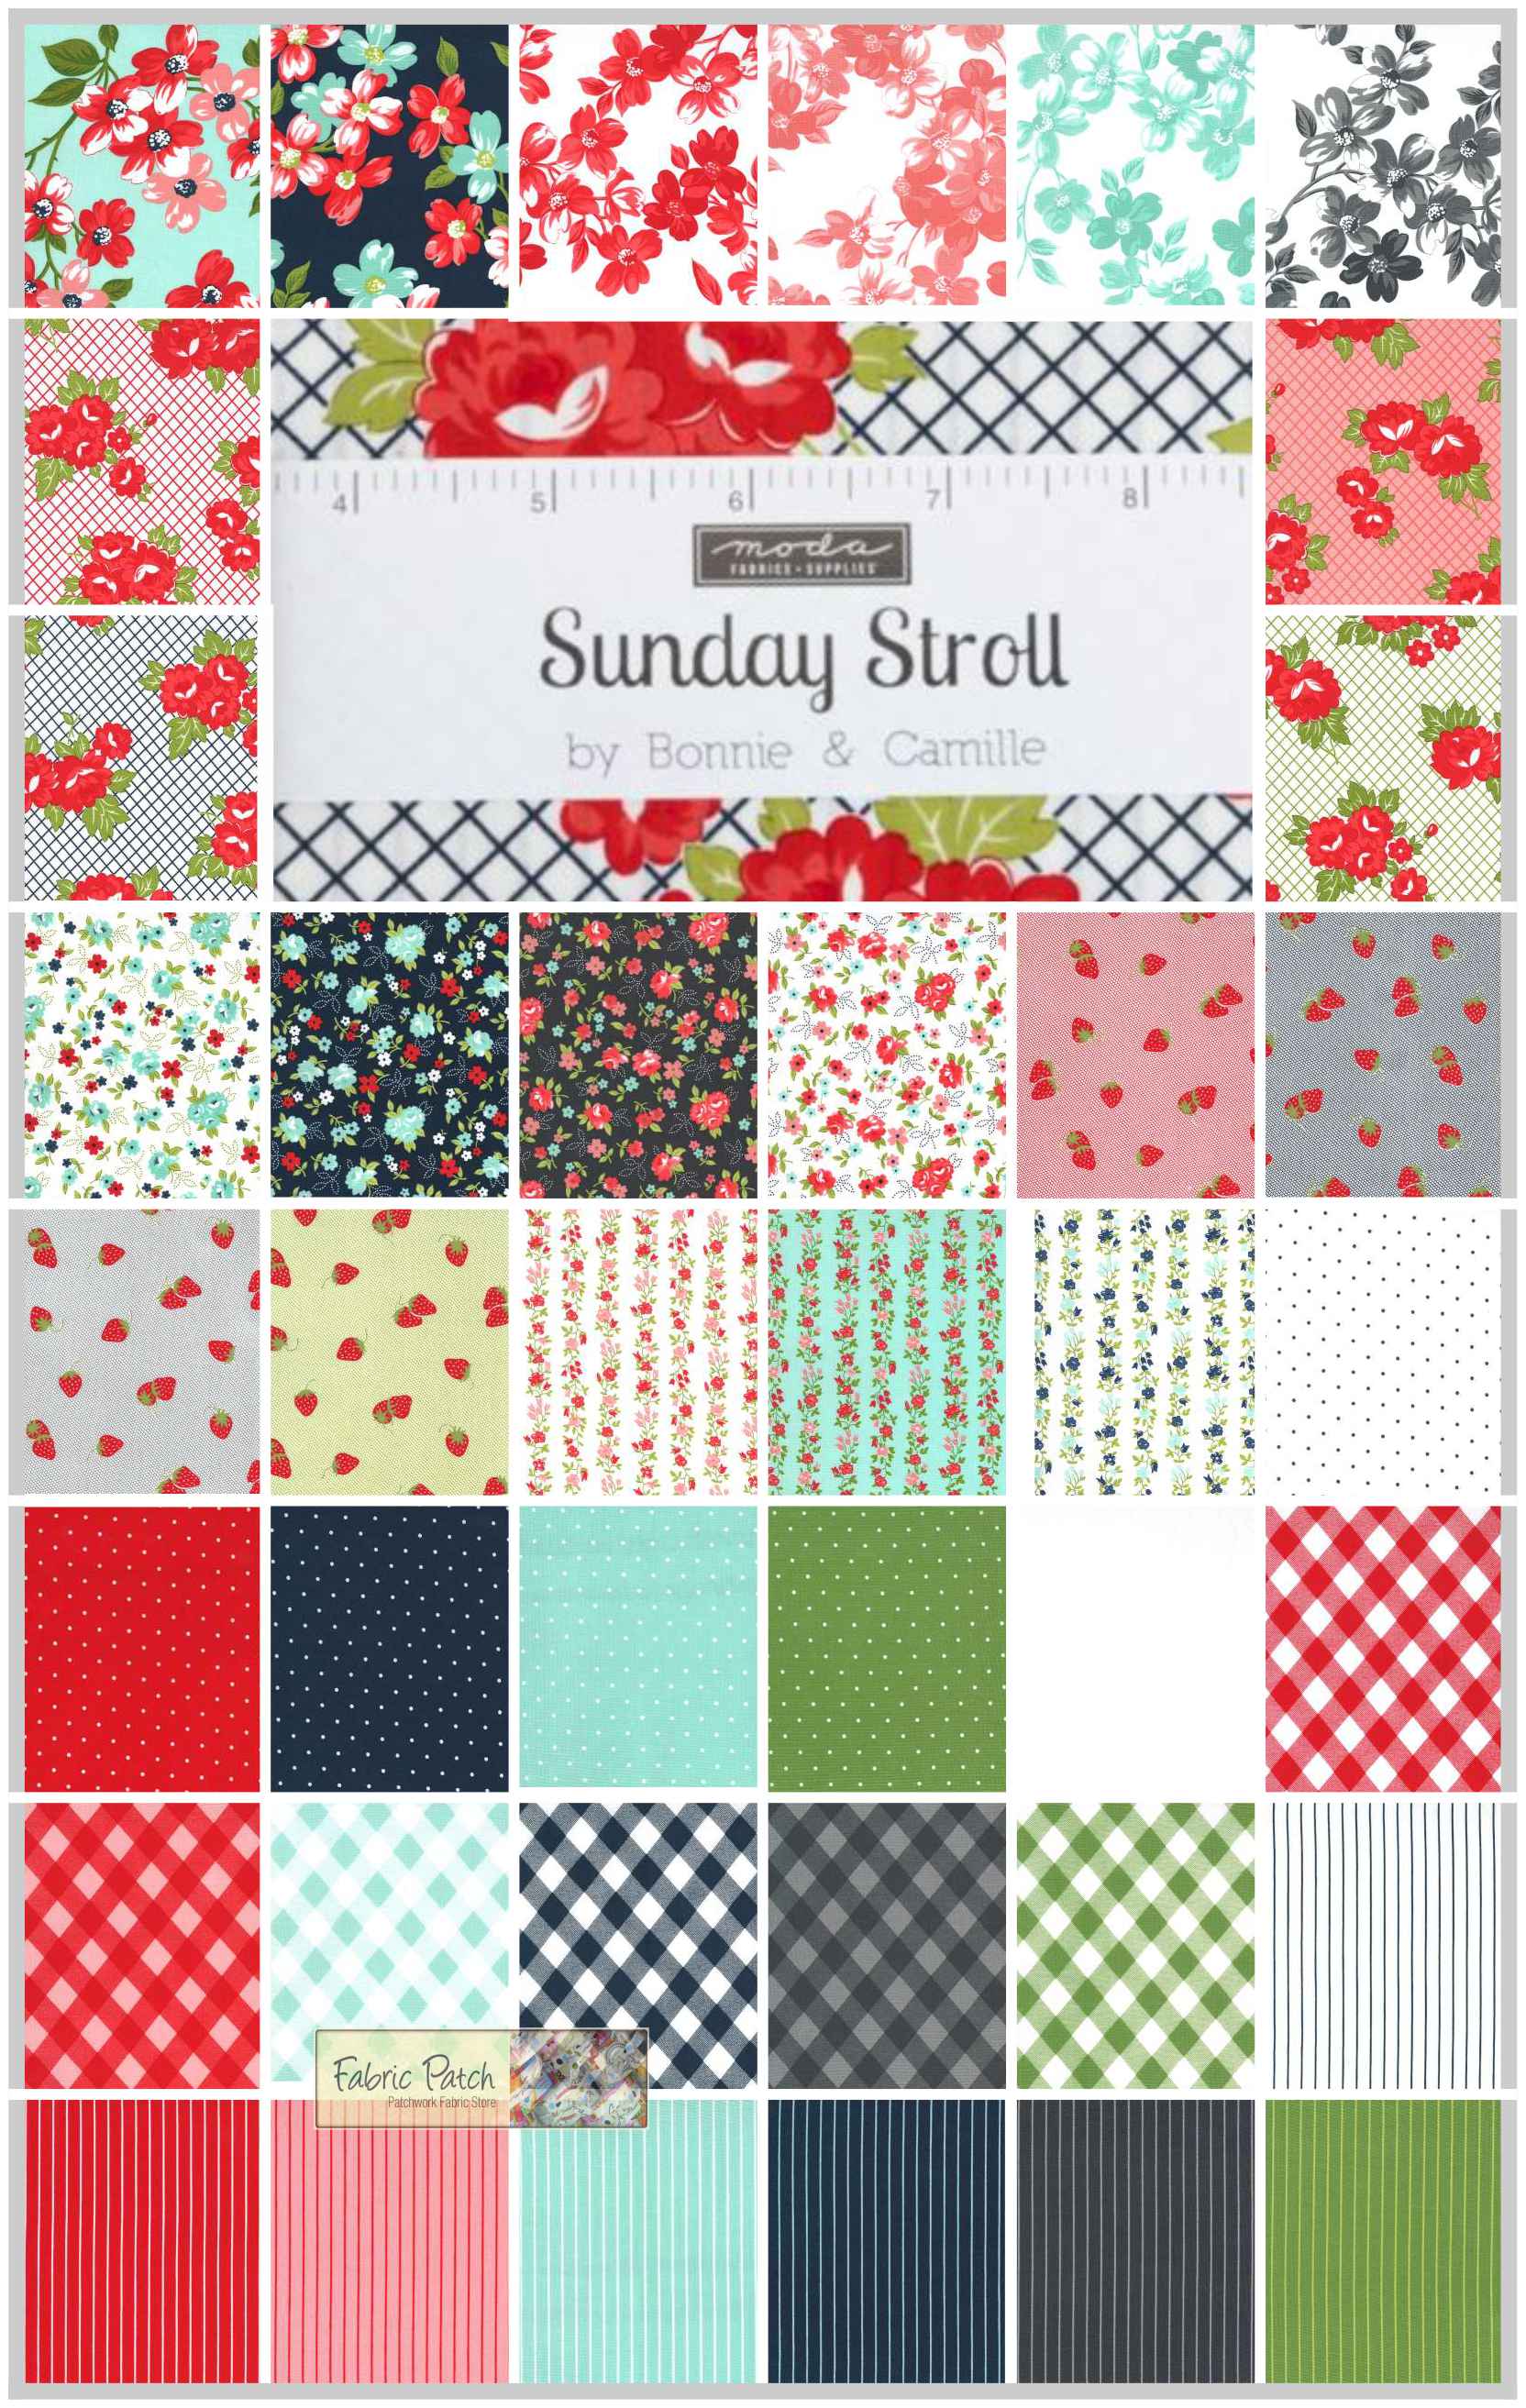 Sunday Stroll charm squares by Bonnie & Camille for Moda Fabrics - patchwork and quilting fabric